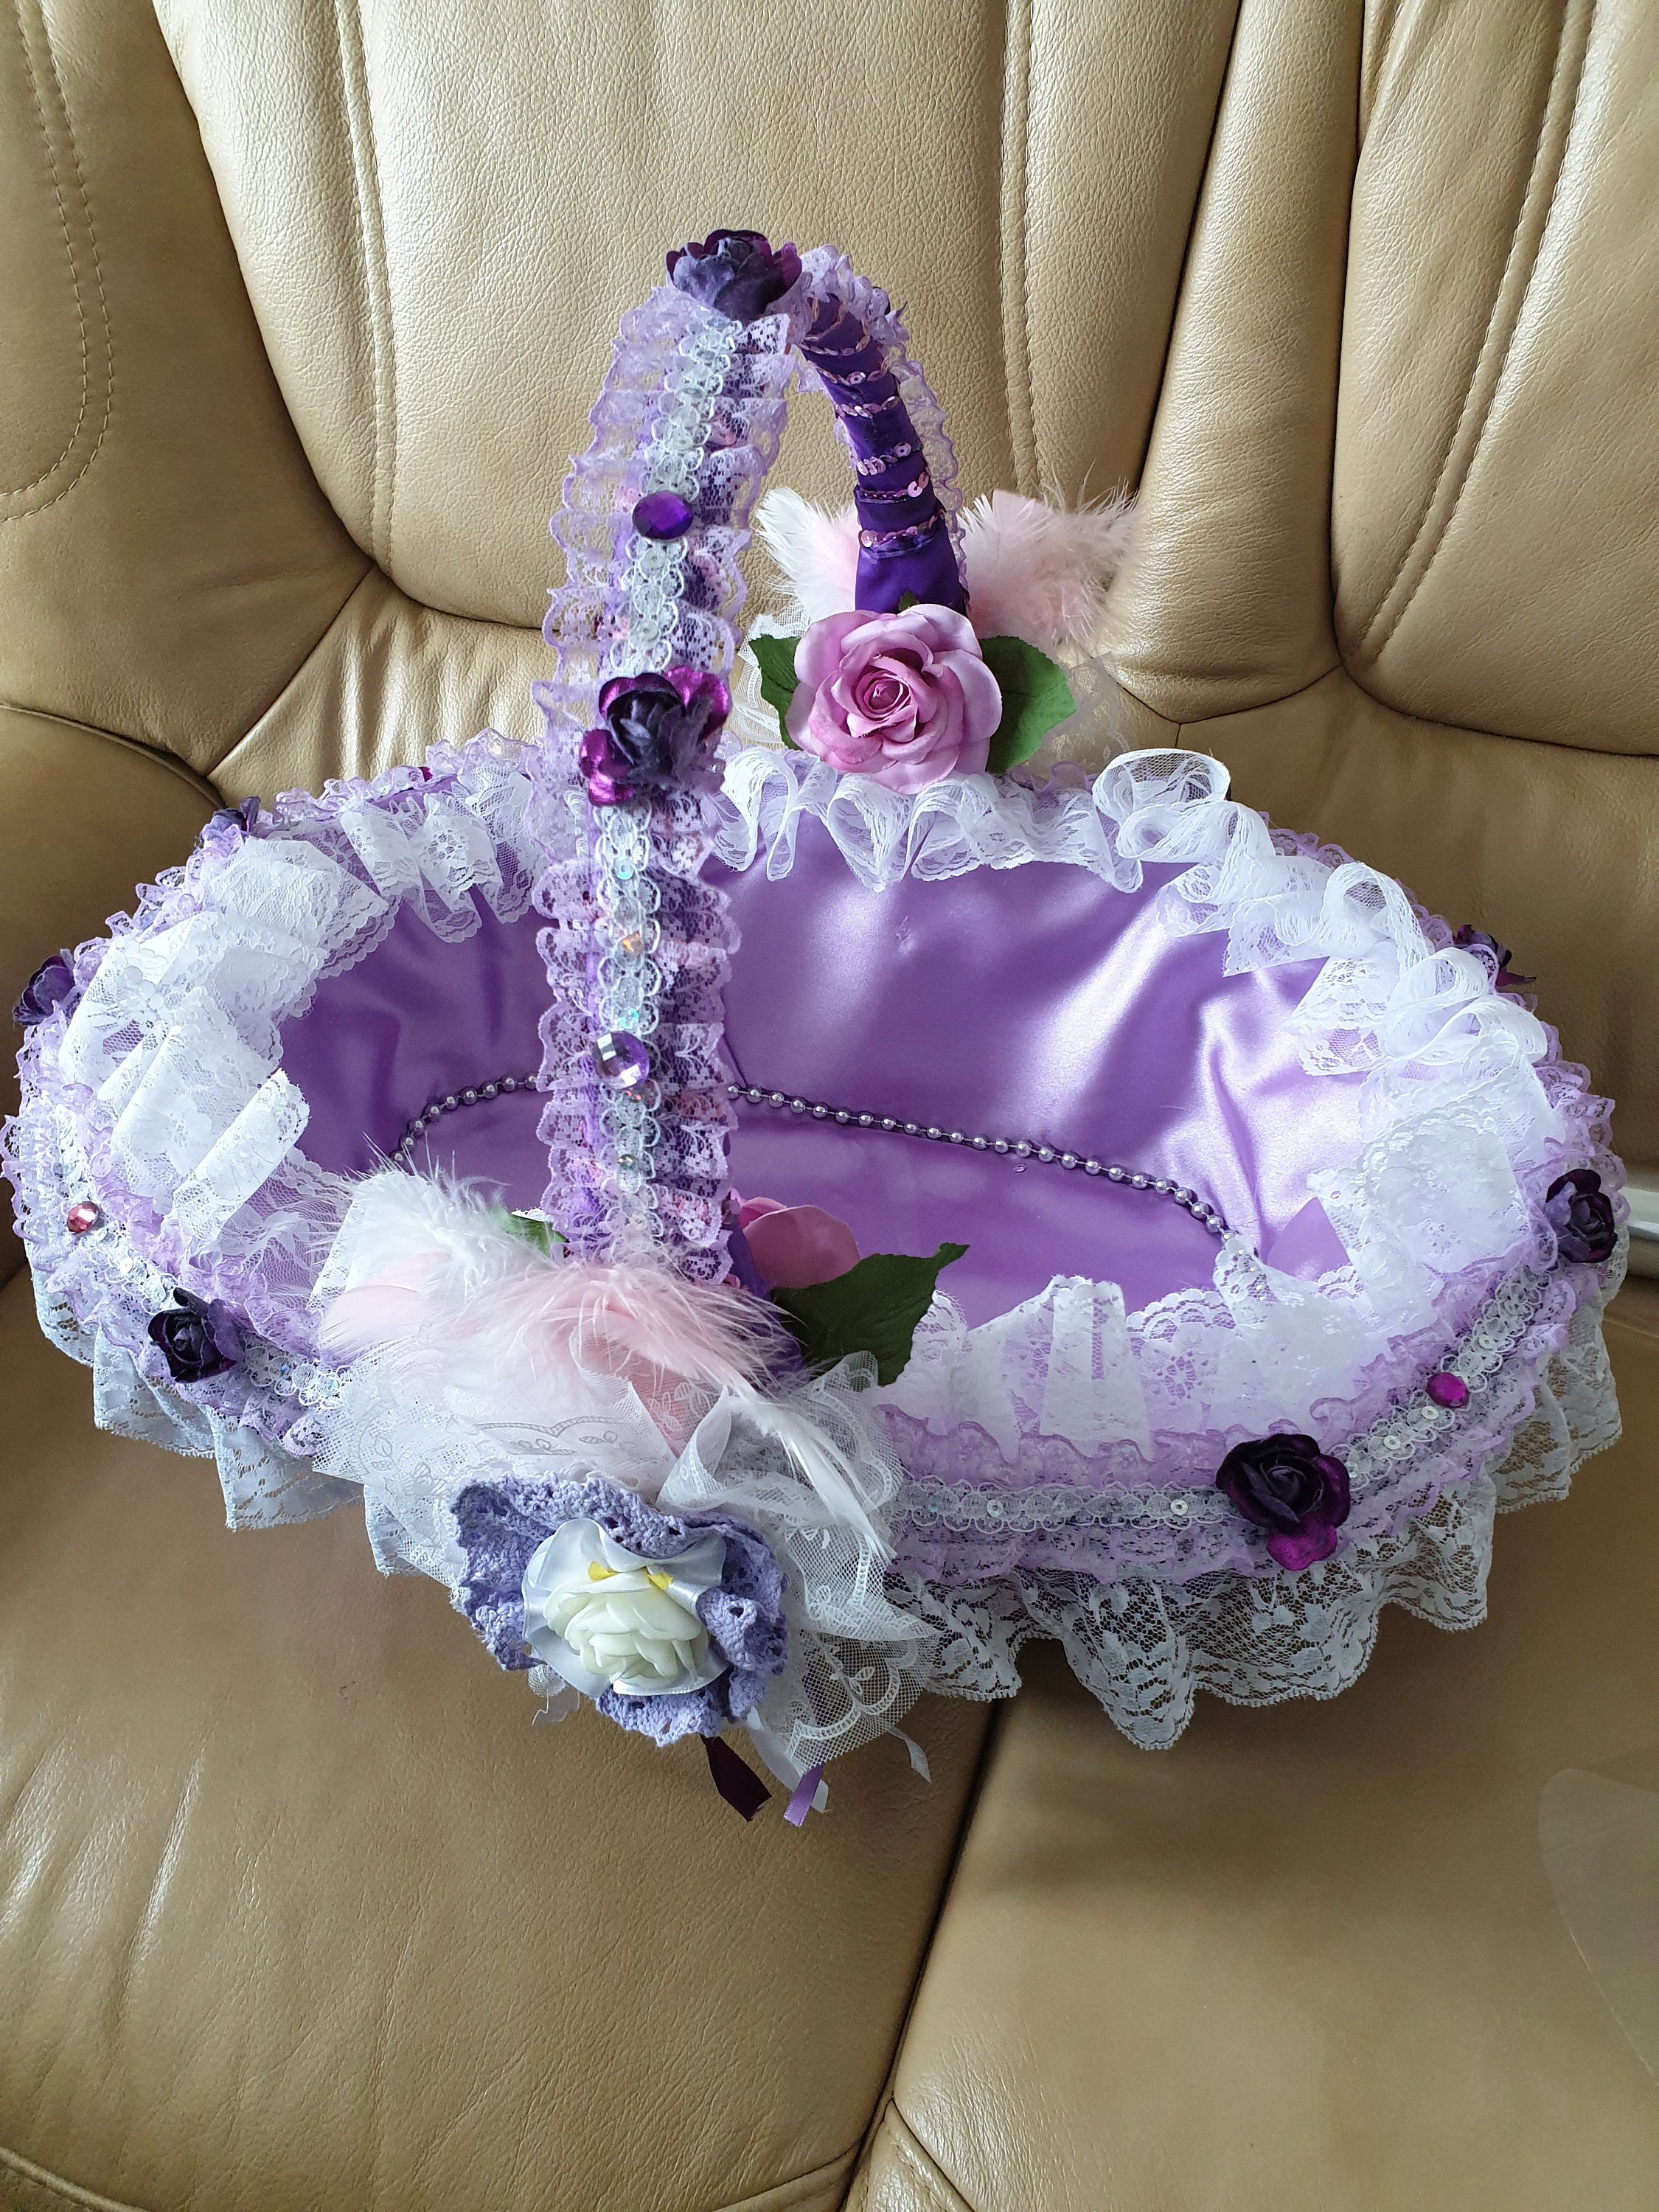 17cm diameter Purple and purple satin wicker basket With purple lace and flowers